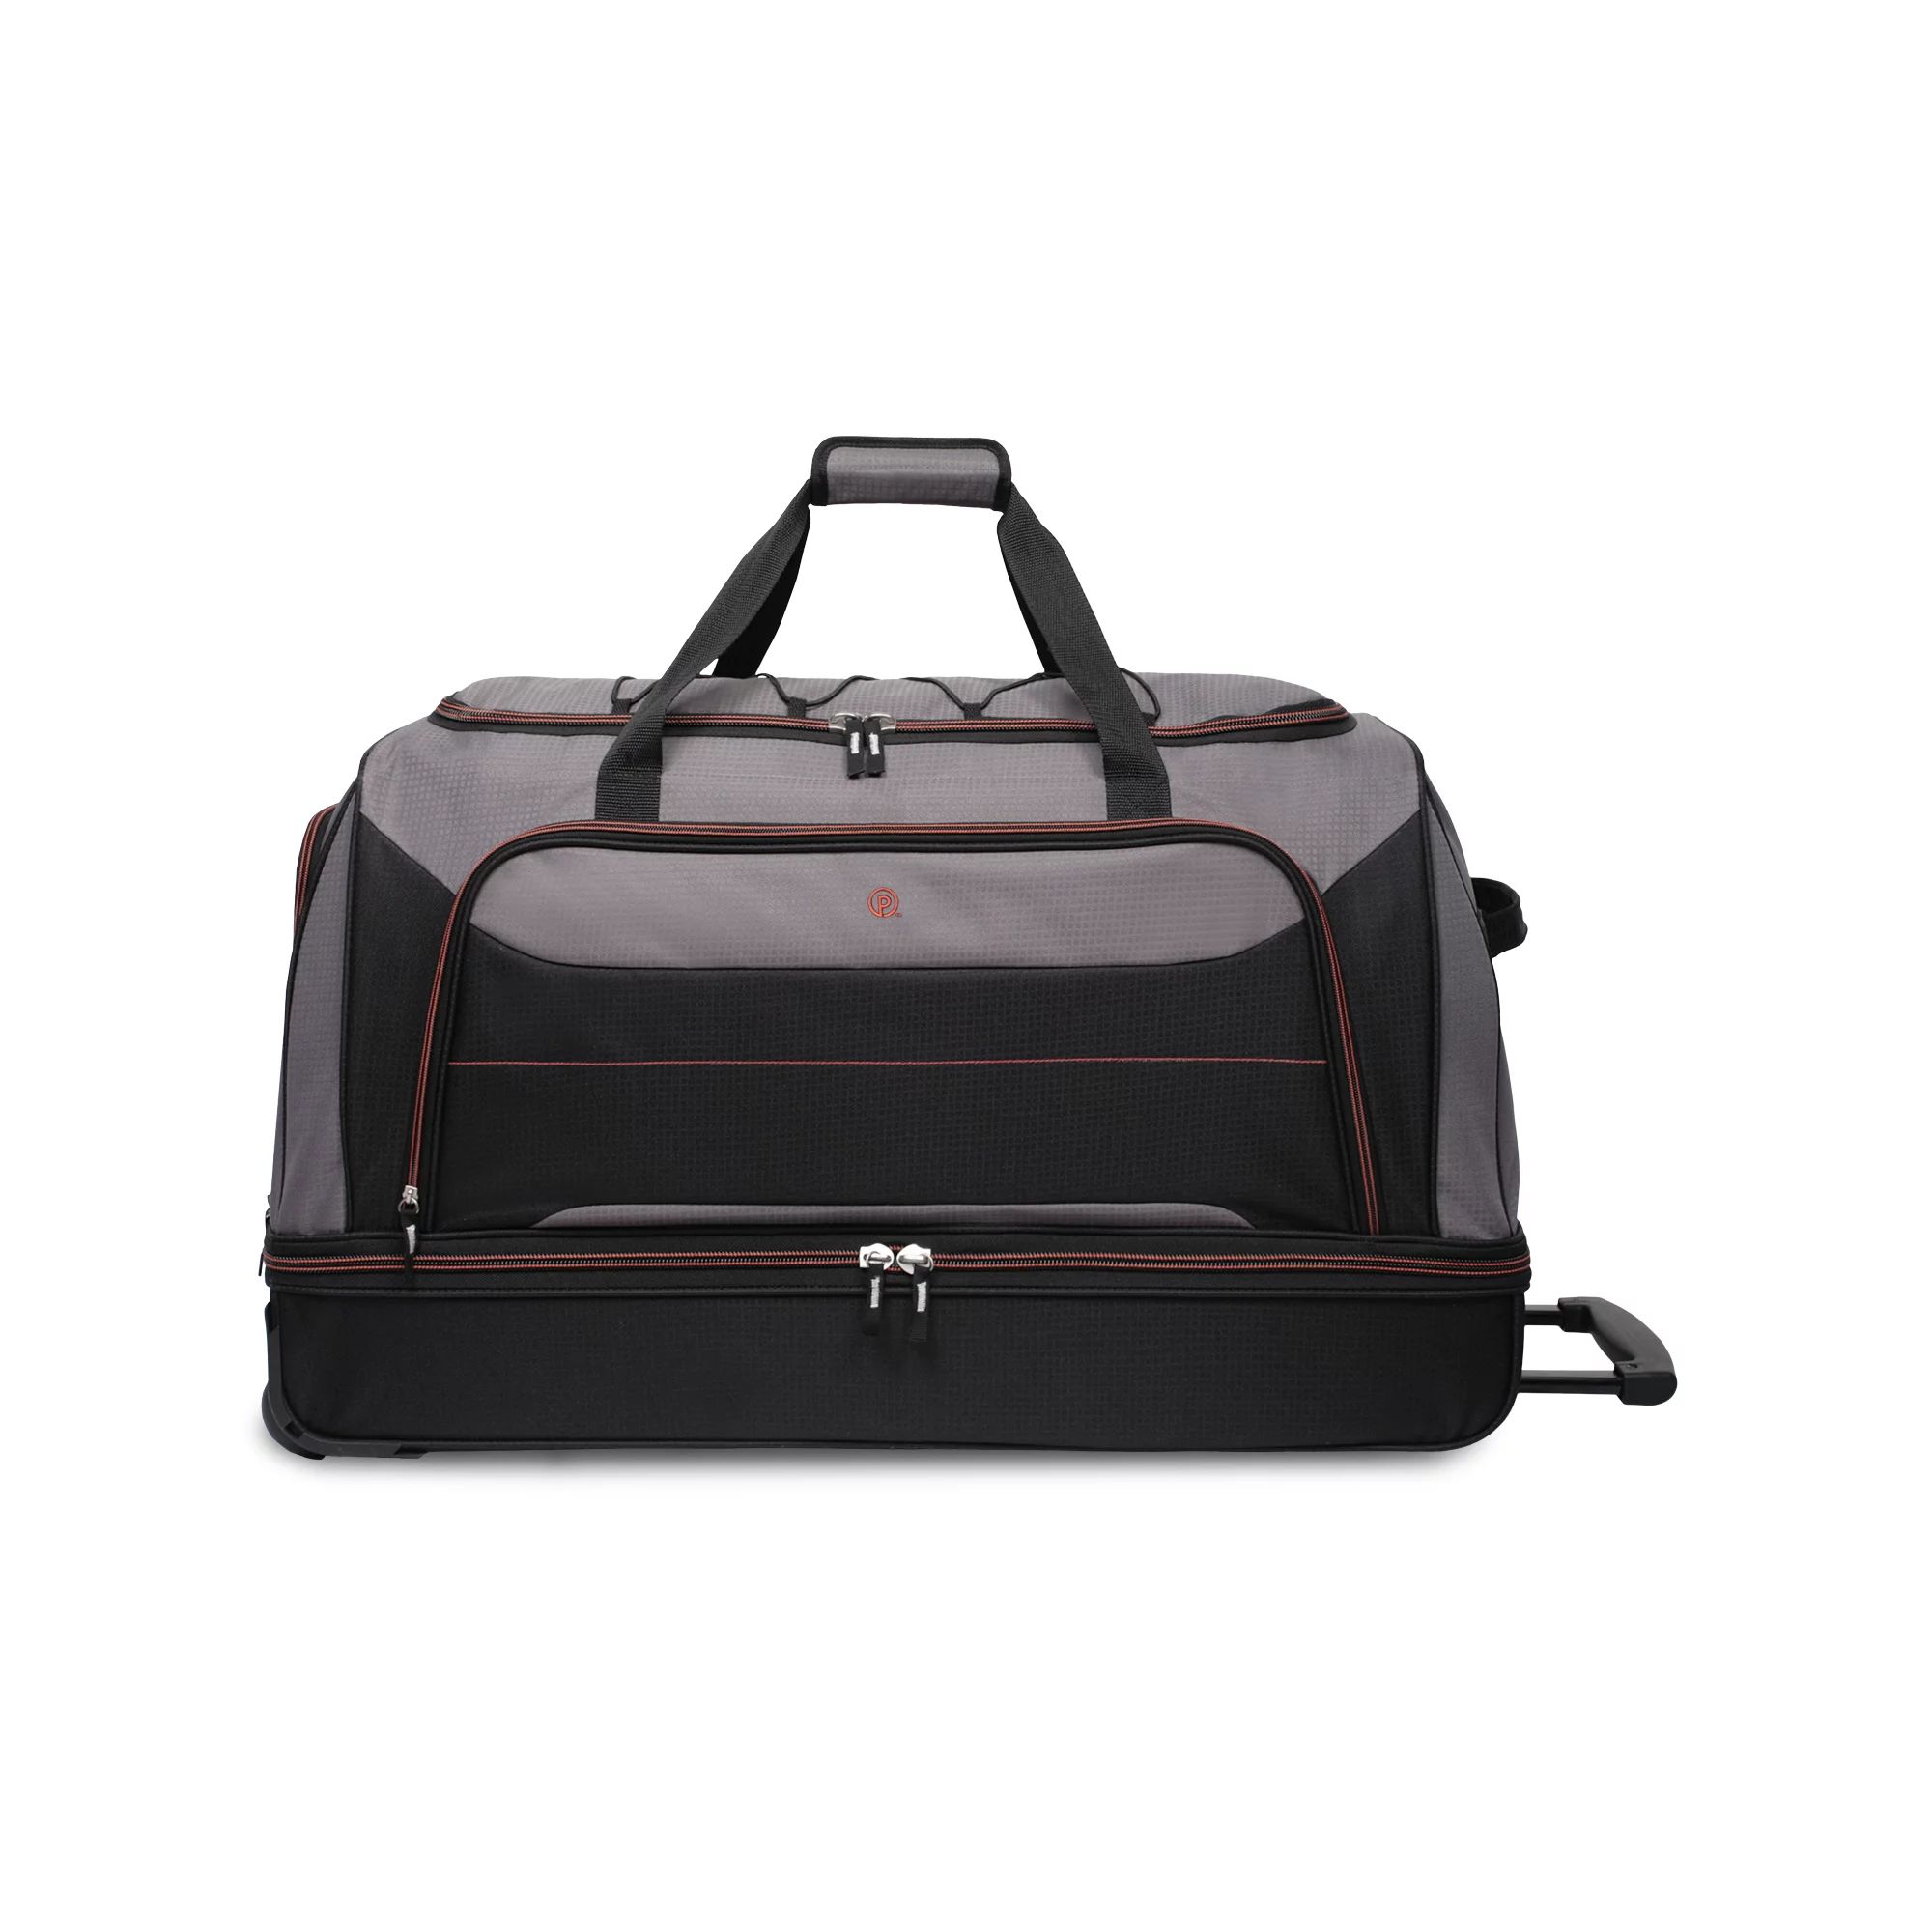 Protege 30 In Rolling Drop-Bottom Duffel Bag for Travel, Black and Grey | Walmart (US)